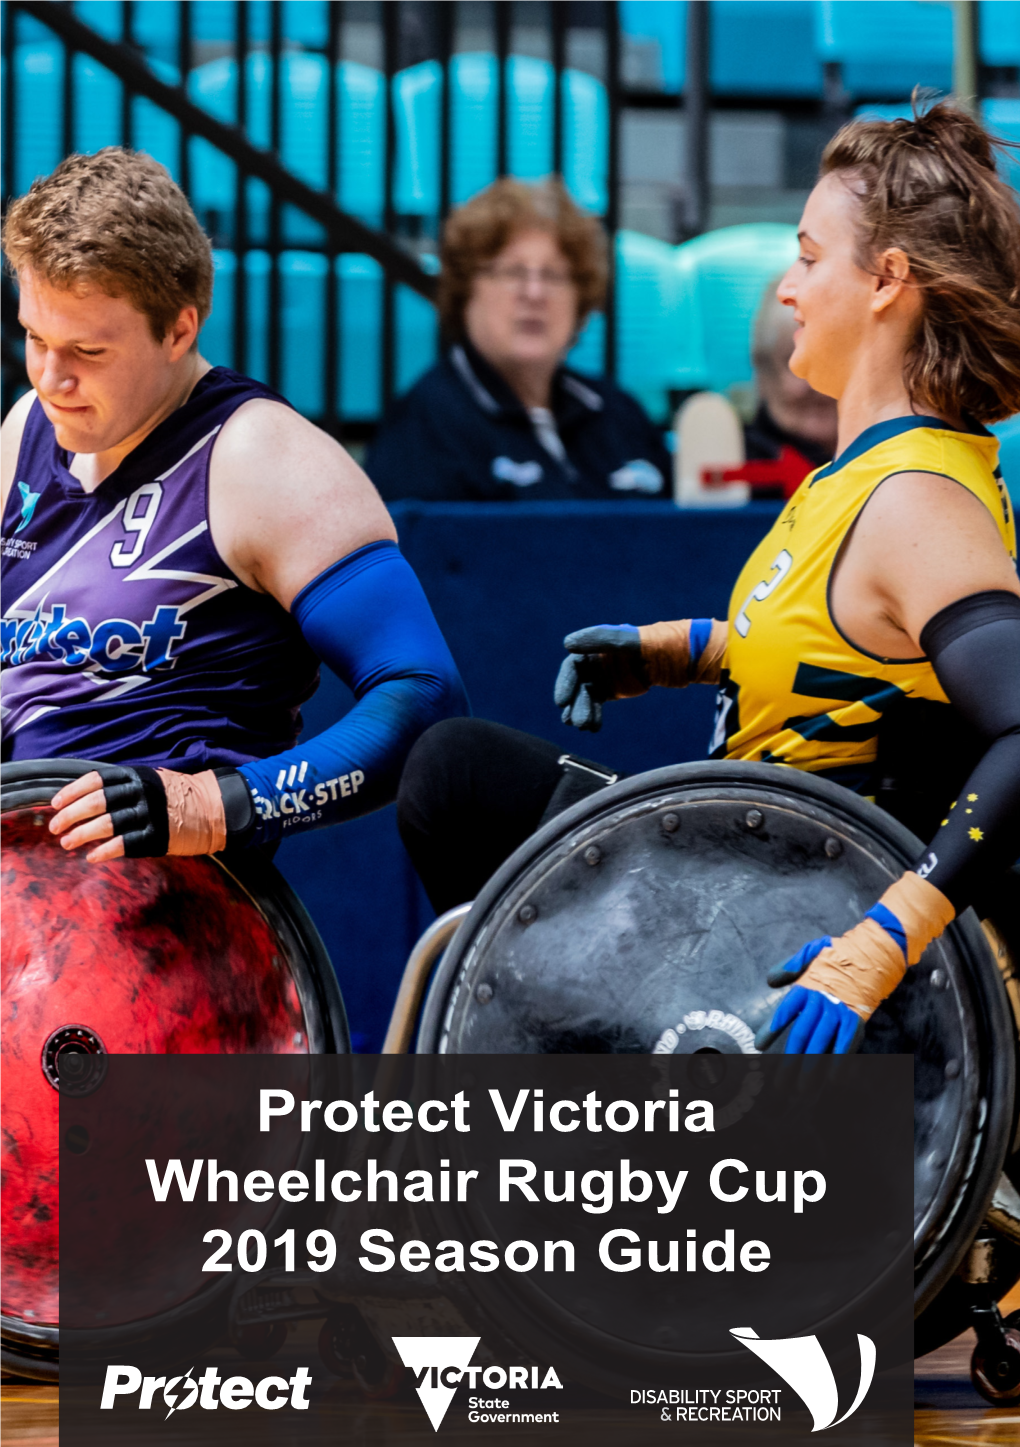 Protect Victoria Wheelchair Rugby Cup 2019 Season Guide Welcome to the 2019 Protect What Is Wheelchair Rugby? Victoria Wheelchair Rugby Cup